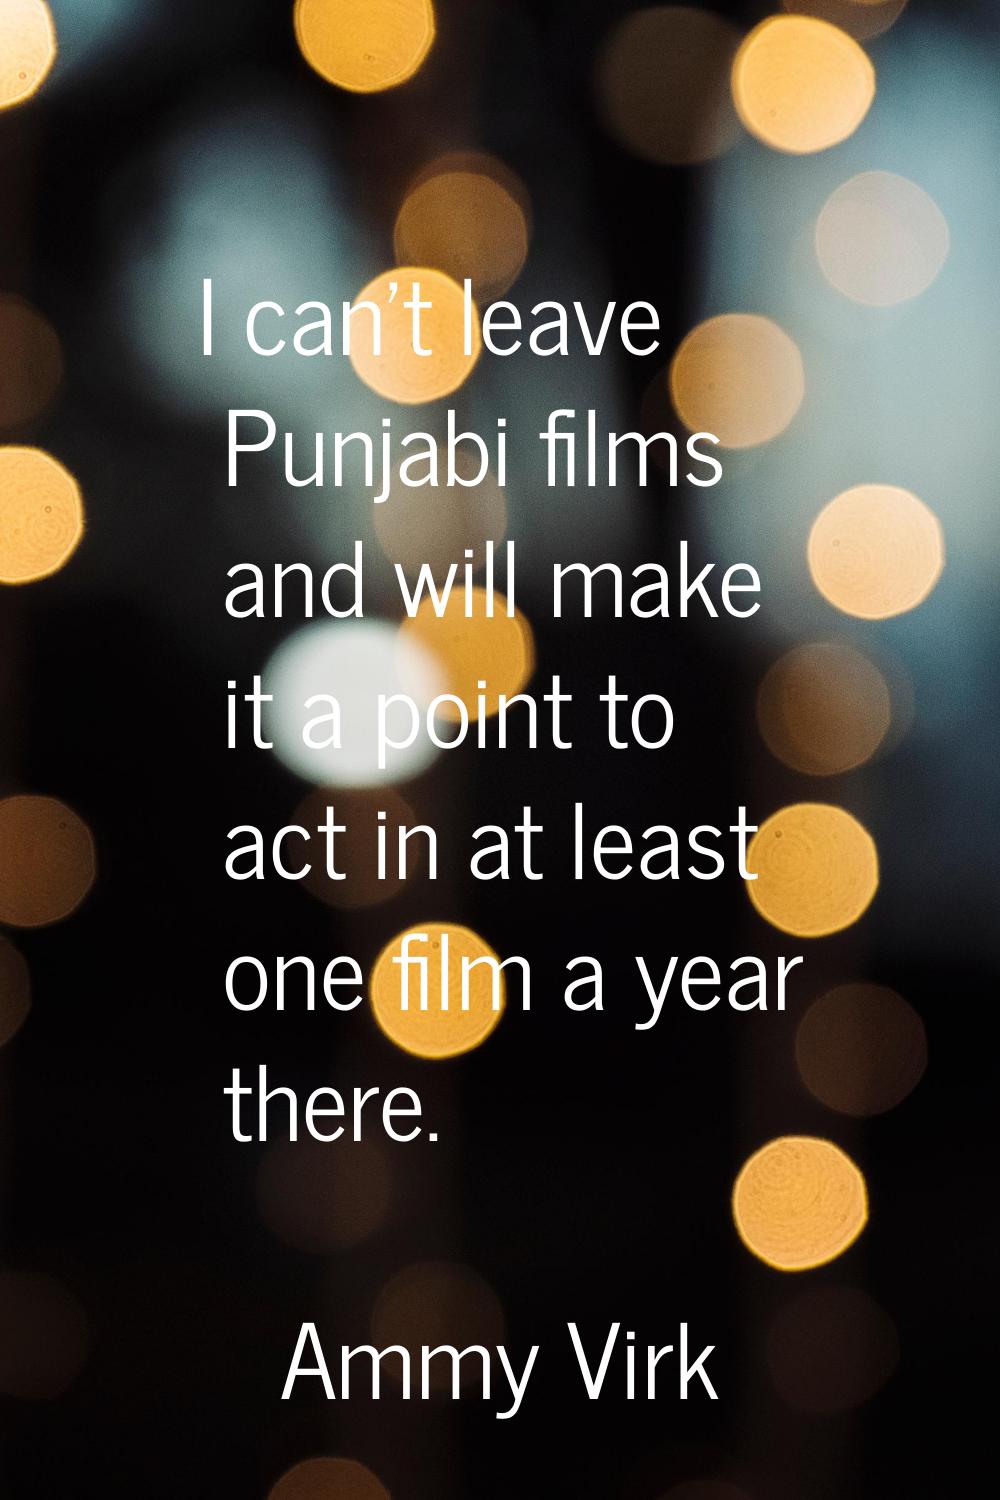 I can't leave Punjabi films and will make it a point to act in at least one film a year there.